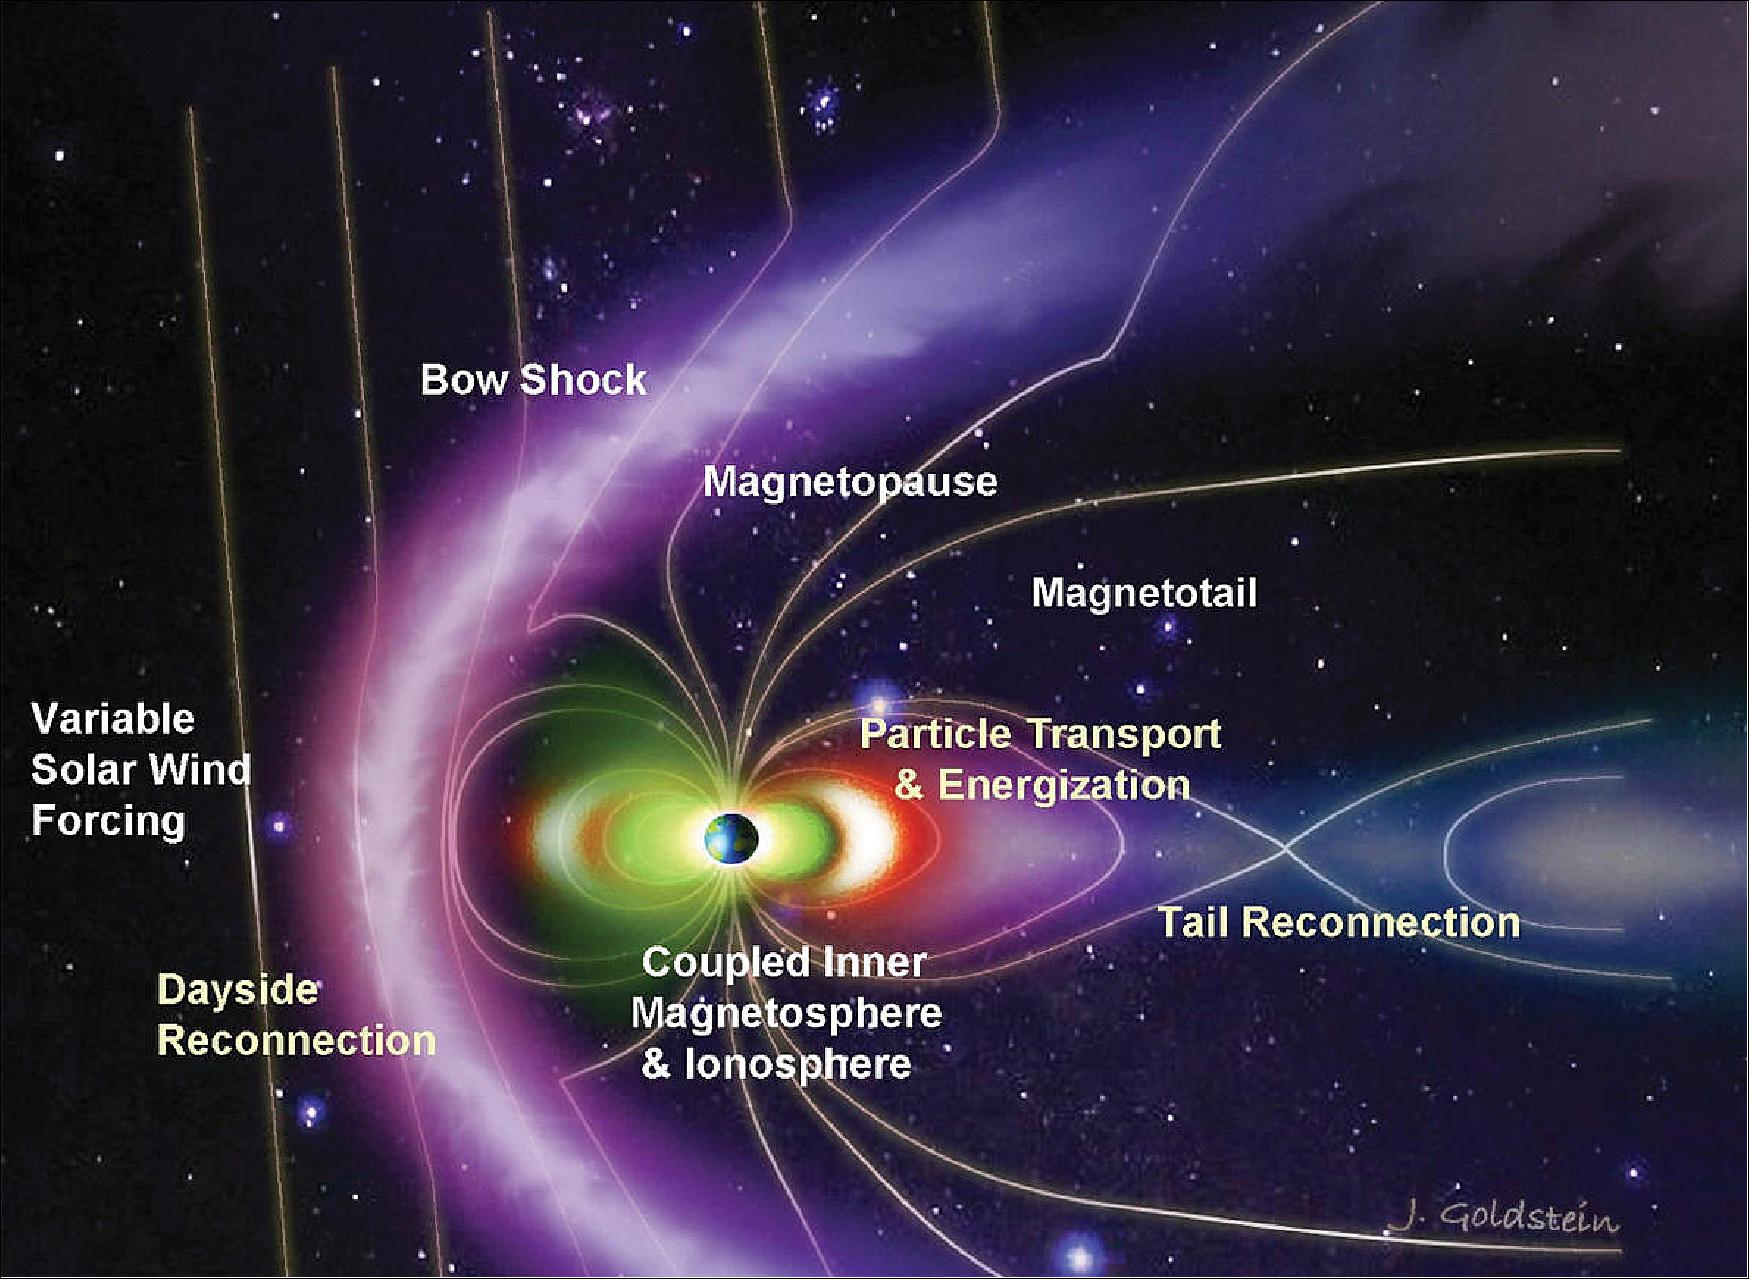 Figure 32: The latest findings of the SwRI-led Magnetospheric Multiscale mission detailed the magnetic reconnection processes taking place in the Earth’s magnetotail. Scientists discovered that the tail regions where magnetic fields meet, break apart and reconnect are surprisingly nonturbulent, but create hypersonic jets of electrons (image credit: SwRI)